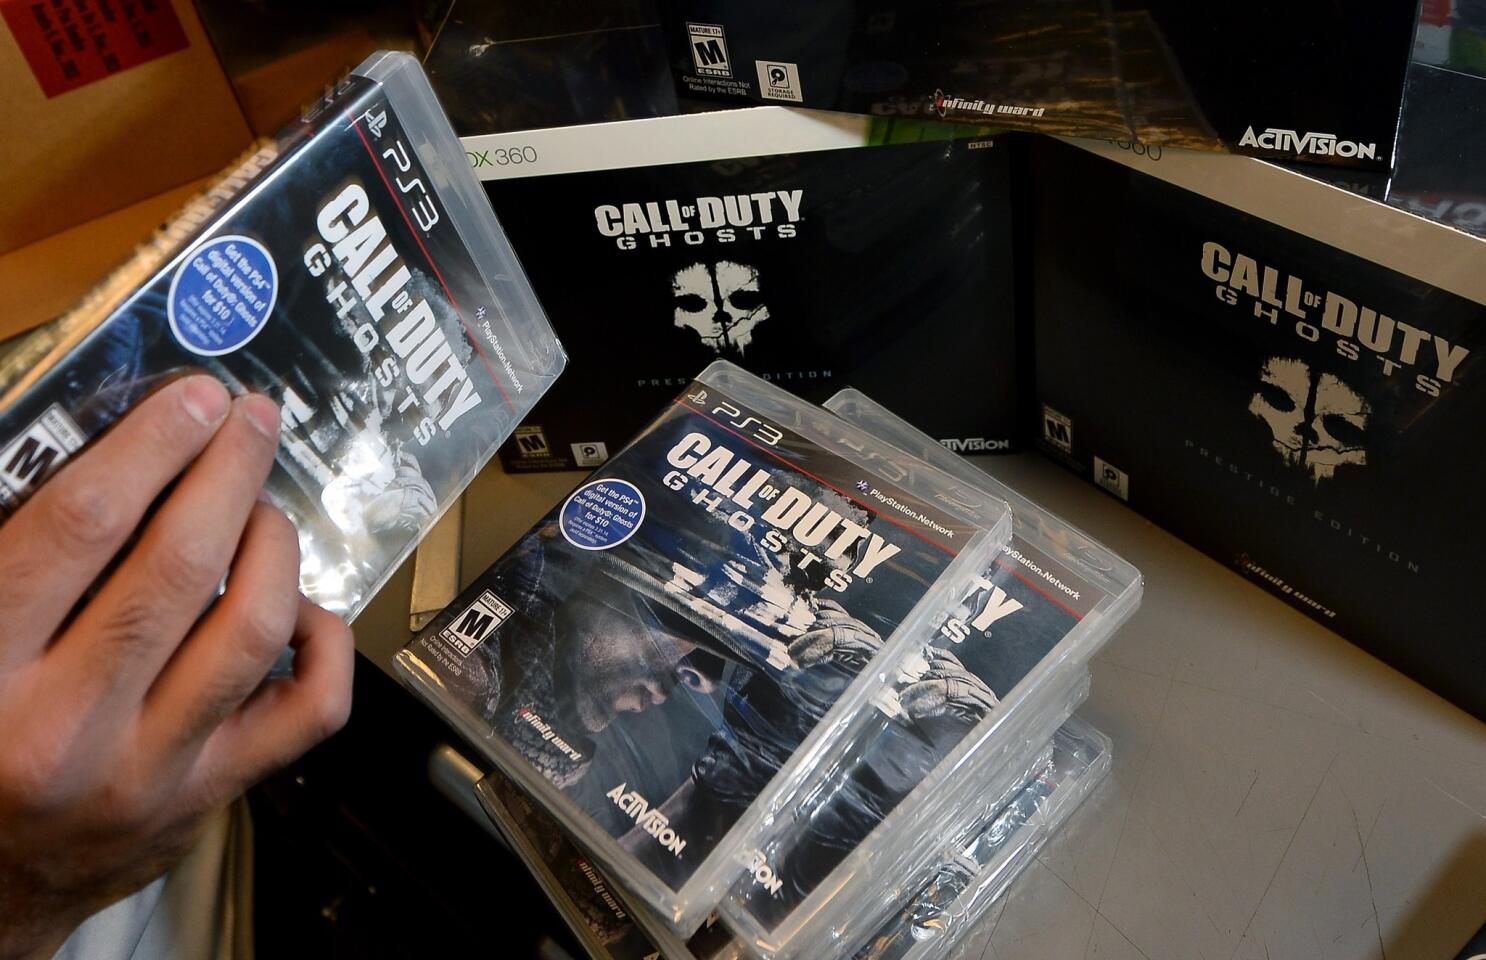 Call Of Duty Ghosts PS3